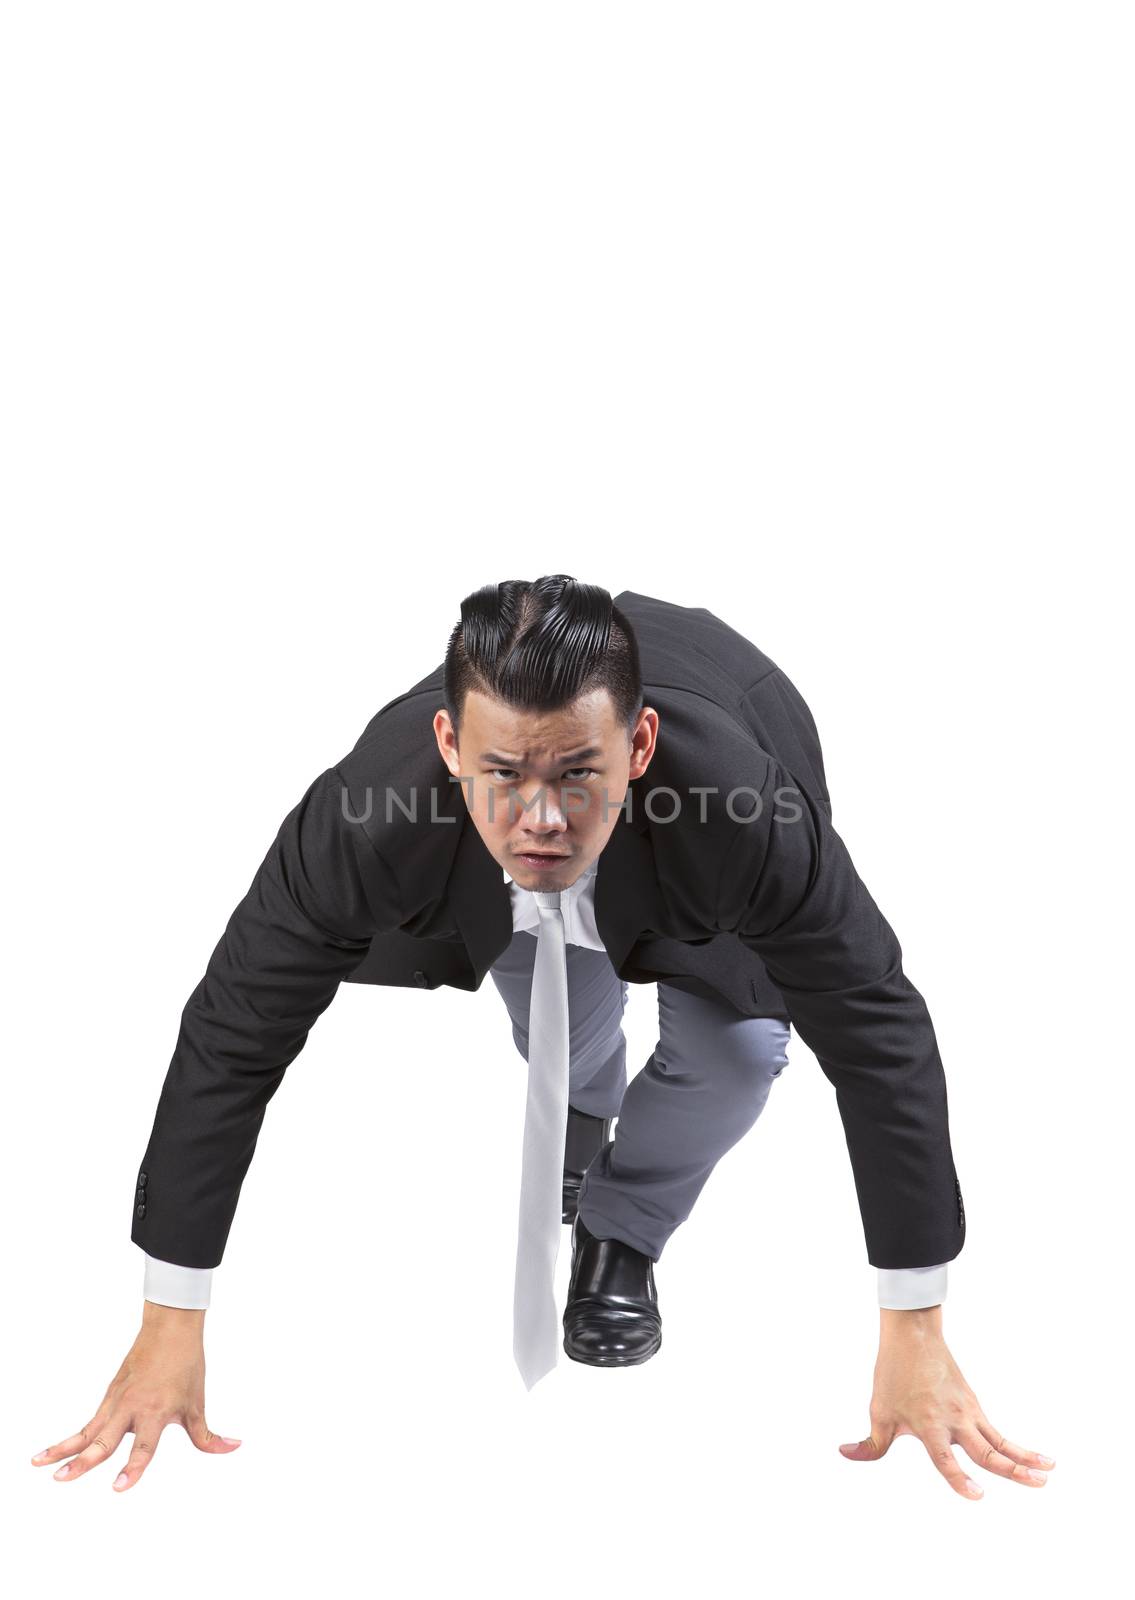 asian business man acting like runner athlete in start patform isolated white background use for speed ,competition abstract meaning